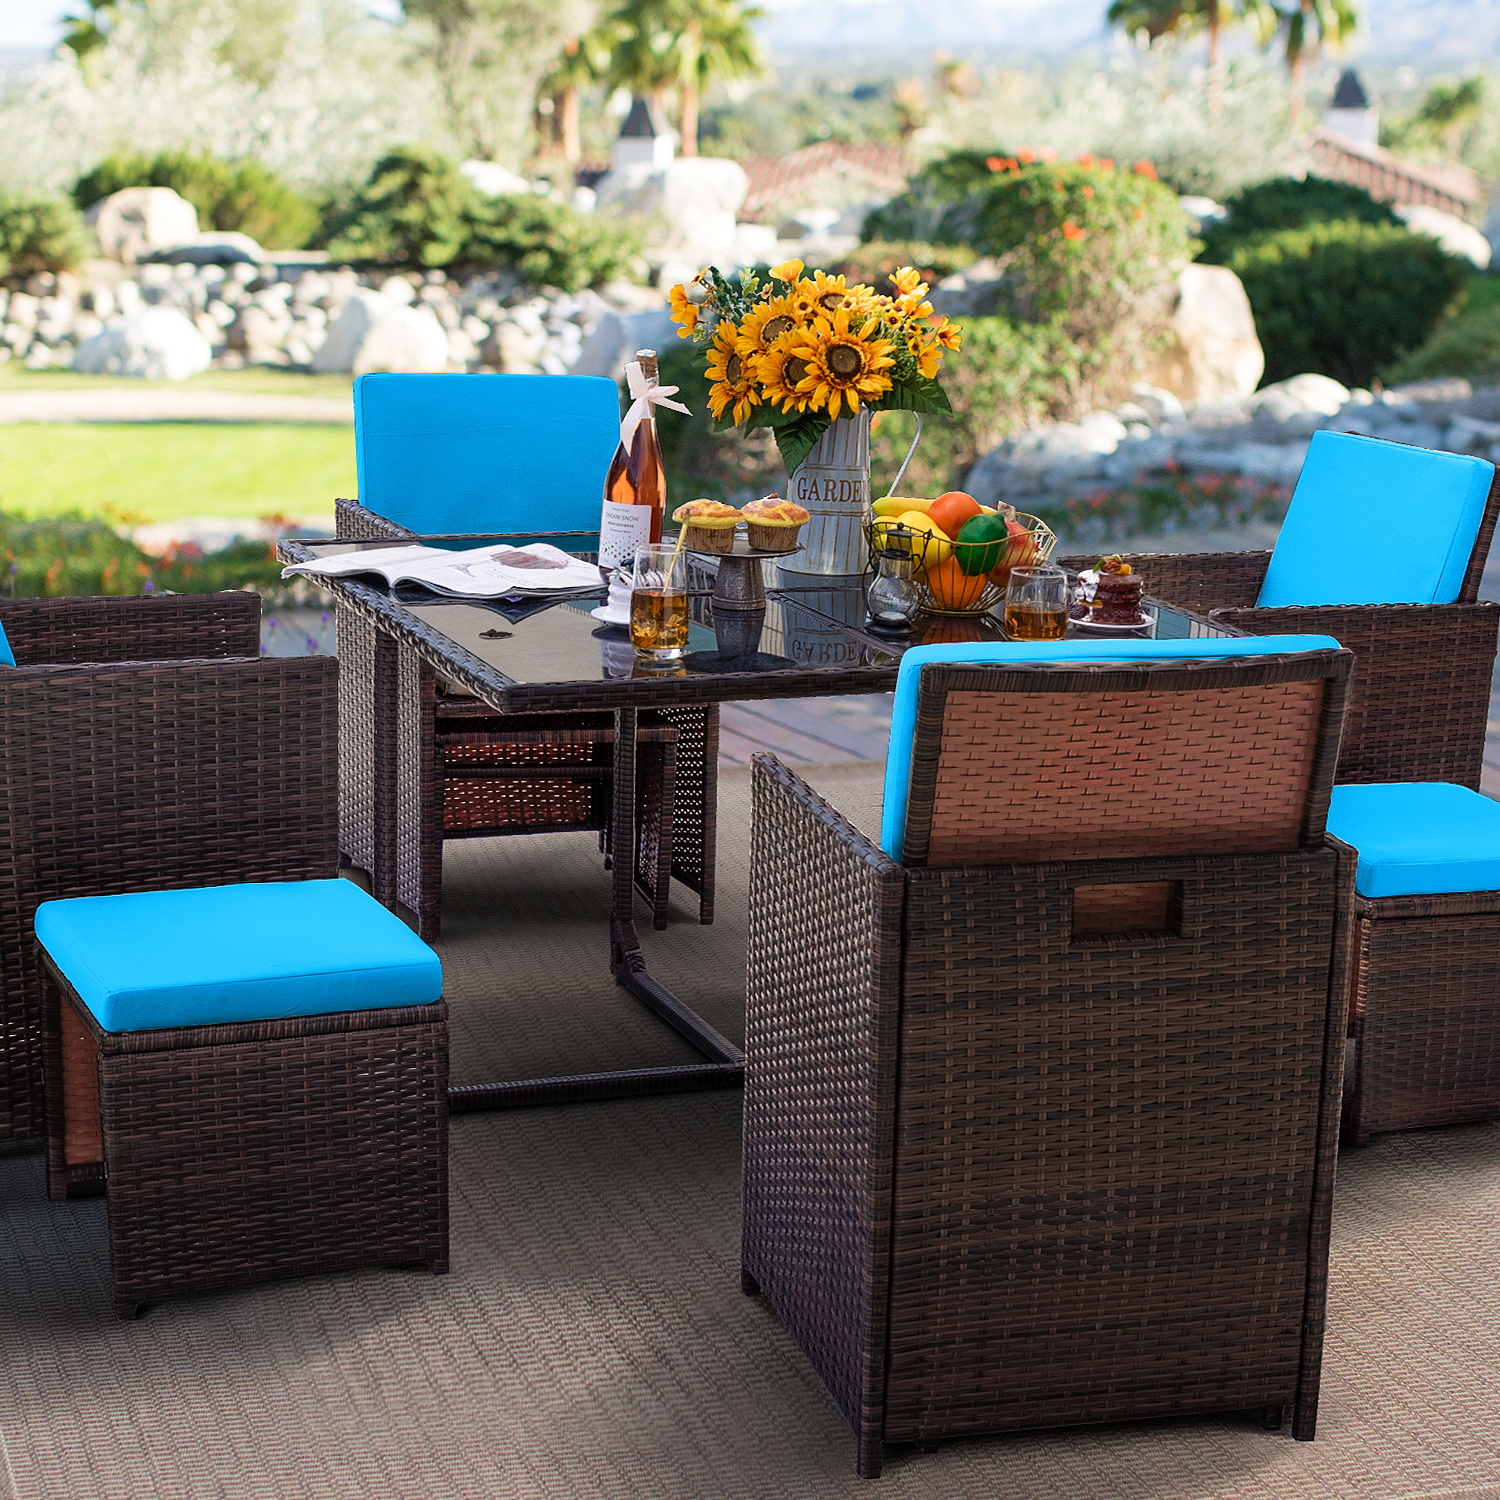 Lacoo 9 Pieces Patio Indoor Dining Sets Outdoor Furniture Patio Wicker Rattan Chairs and Tempered Glass Table Sectional Set Conversation Set Cushioned with Ottoman, Blue, 8 - image 3 of 7